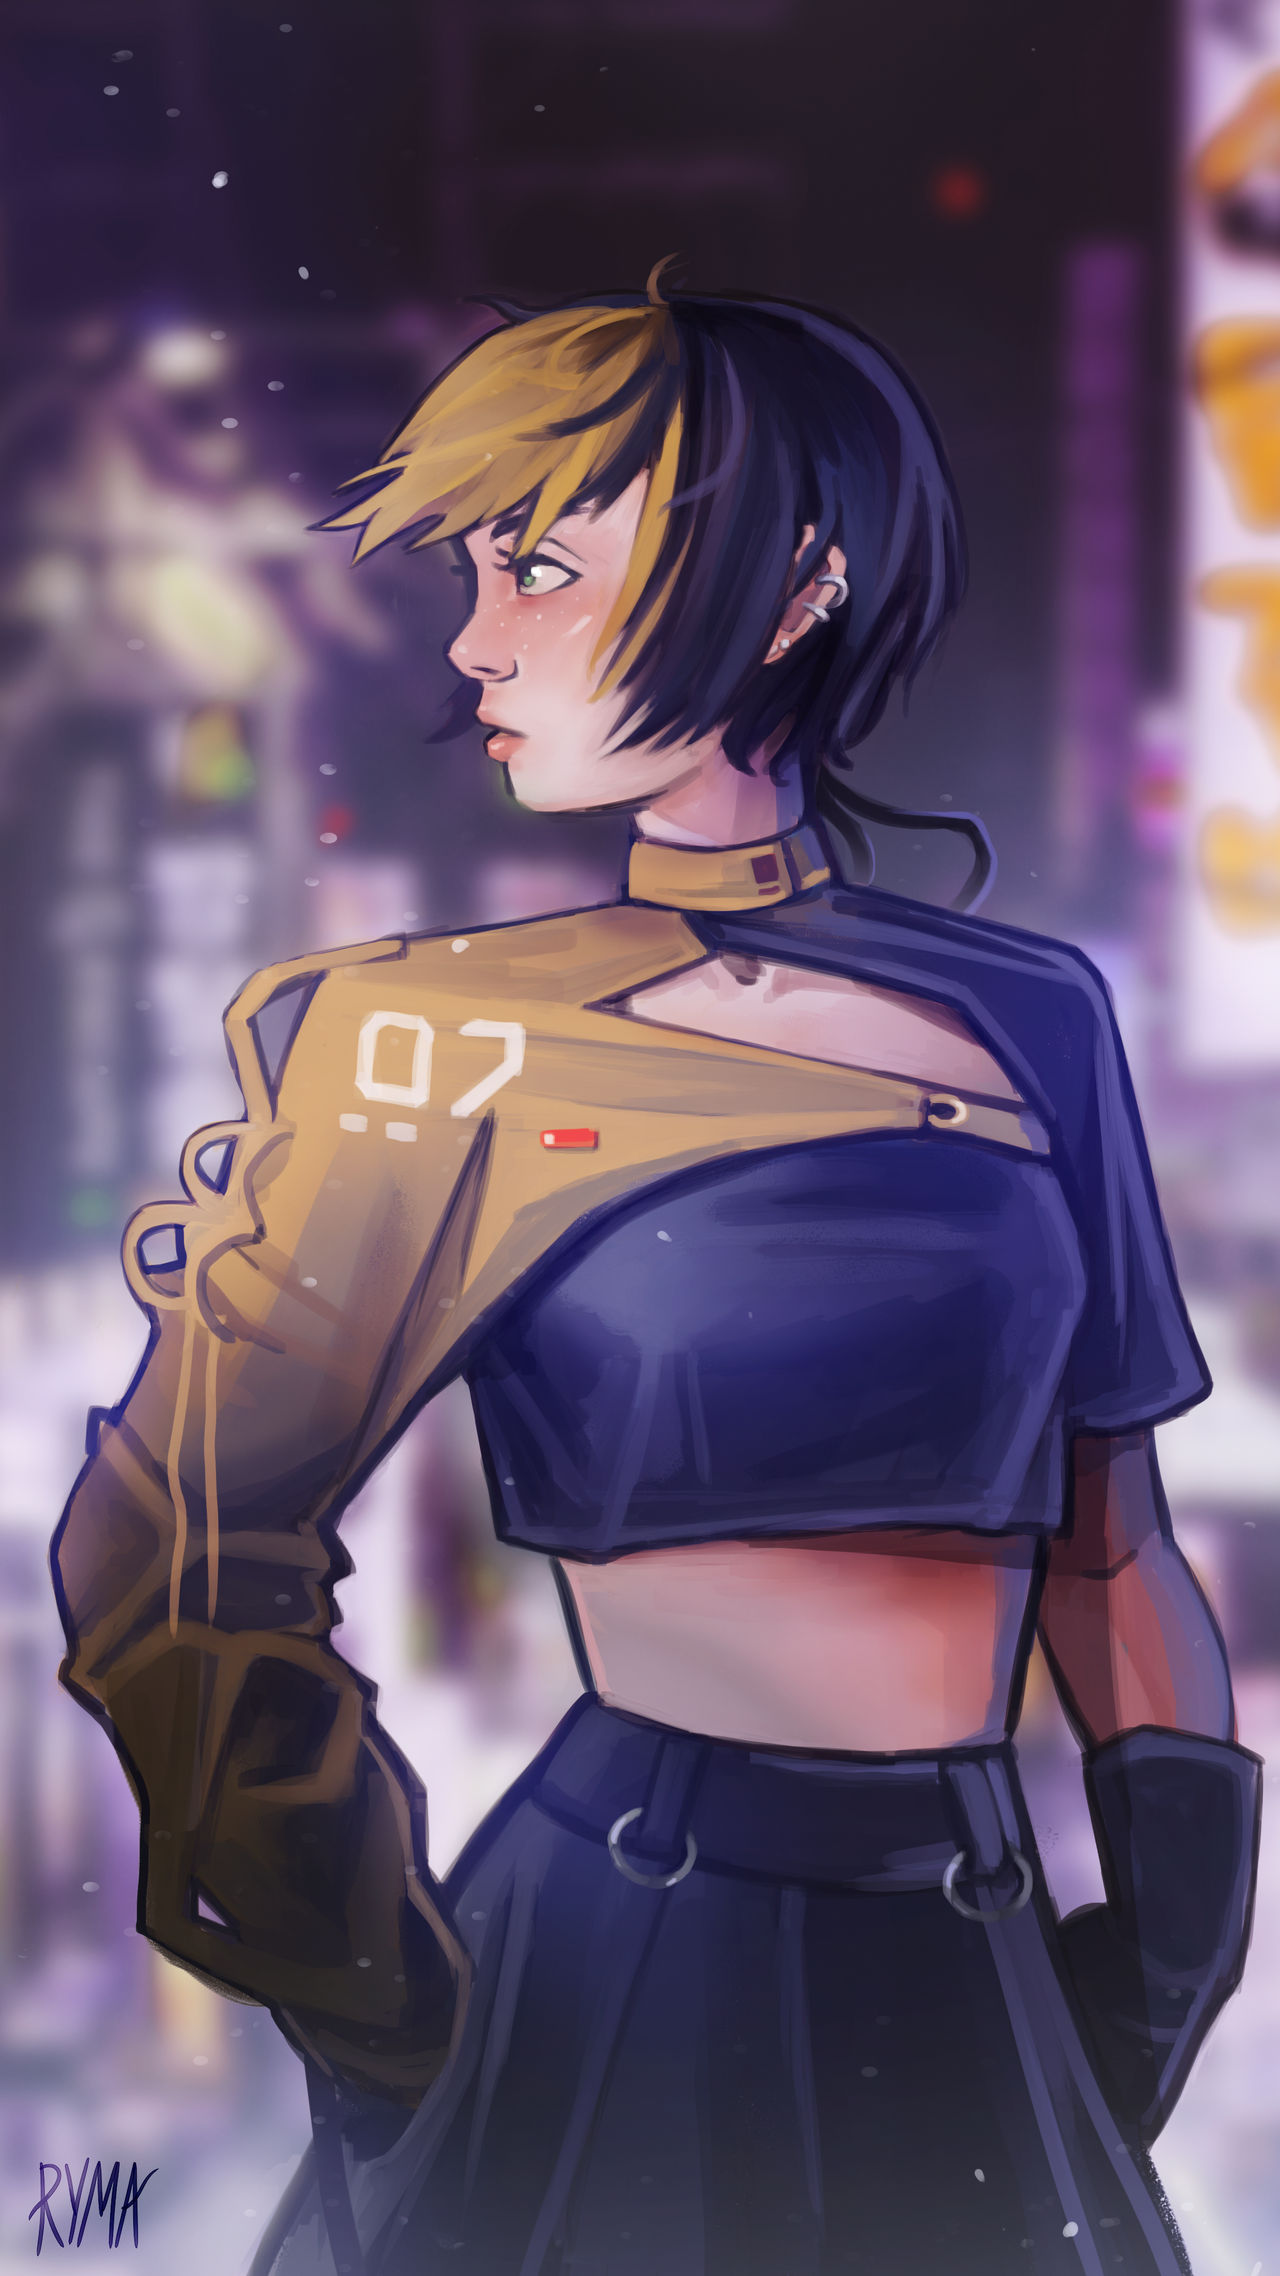 CLOTHING: sci-fi and cyberpunk - Art + Animations - Episode Forums